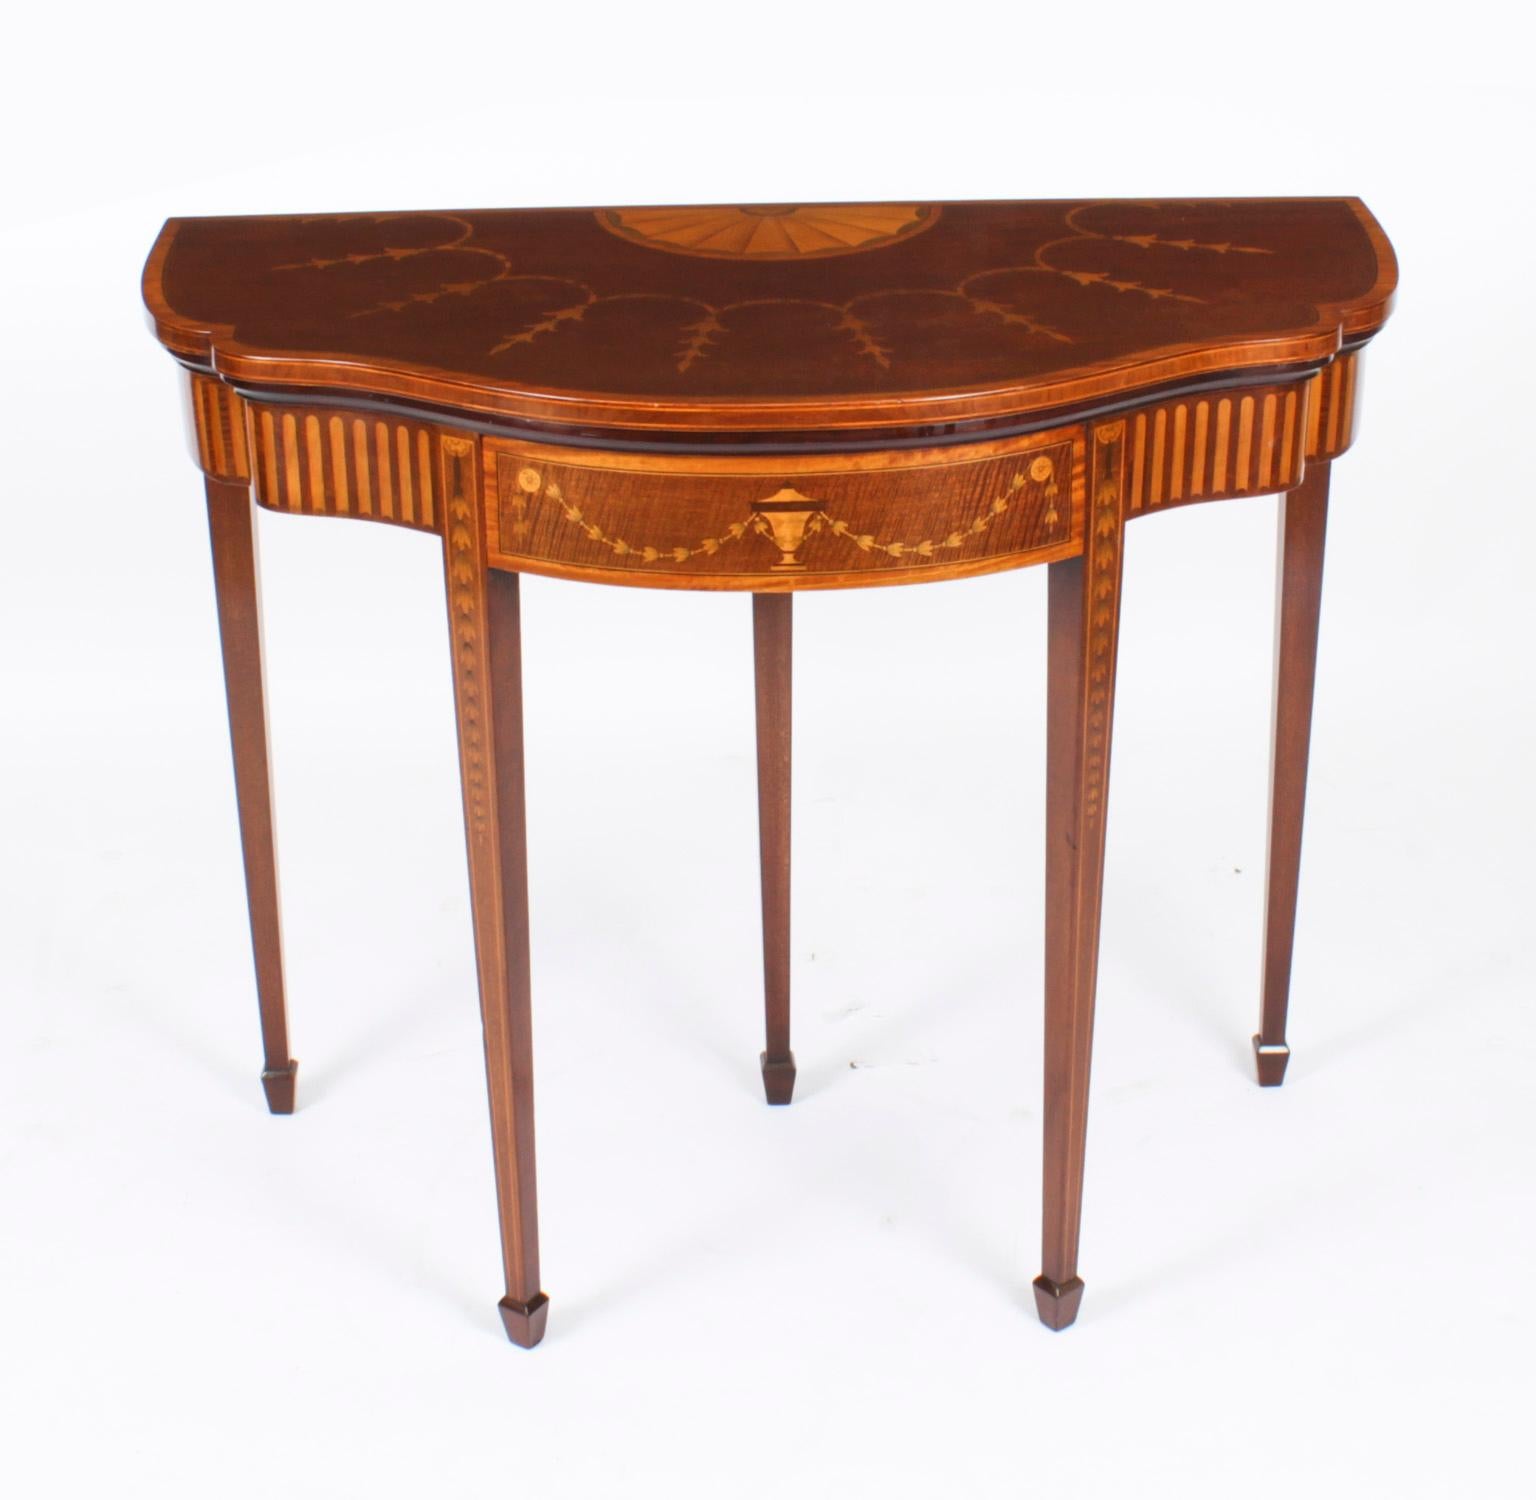 This is a superb antique mahogany serpentine fold-over card table, circa 1880 in date.
 
THE BOTANICAL NAME FOR THE MAHOGANY THAT THIS CARD TABLE IS MADE OF IS SWIETENIA MACROPHYLLA AND THIS TYPE OF MAHOGANY IS NOT SUBJECT TO CITES REGULATION.

This